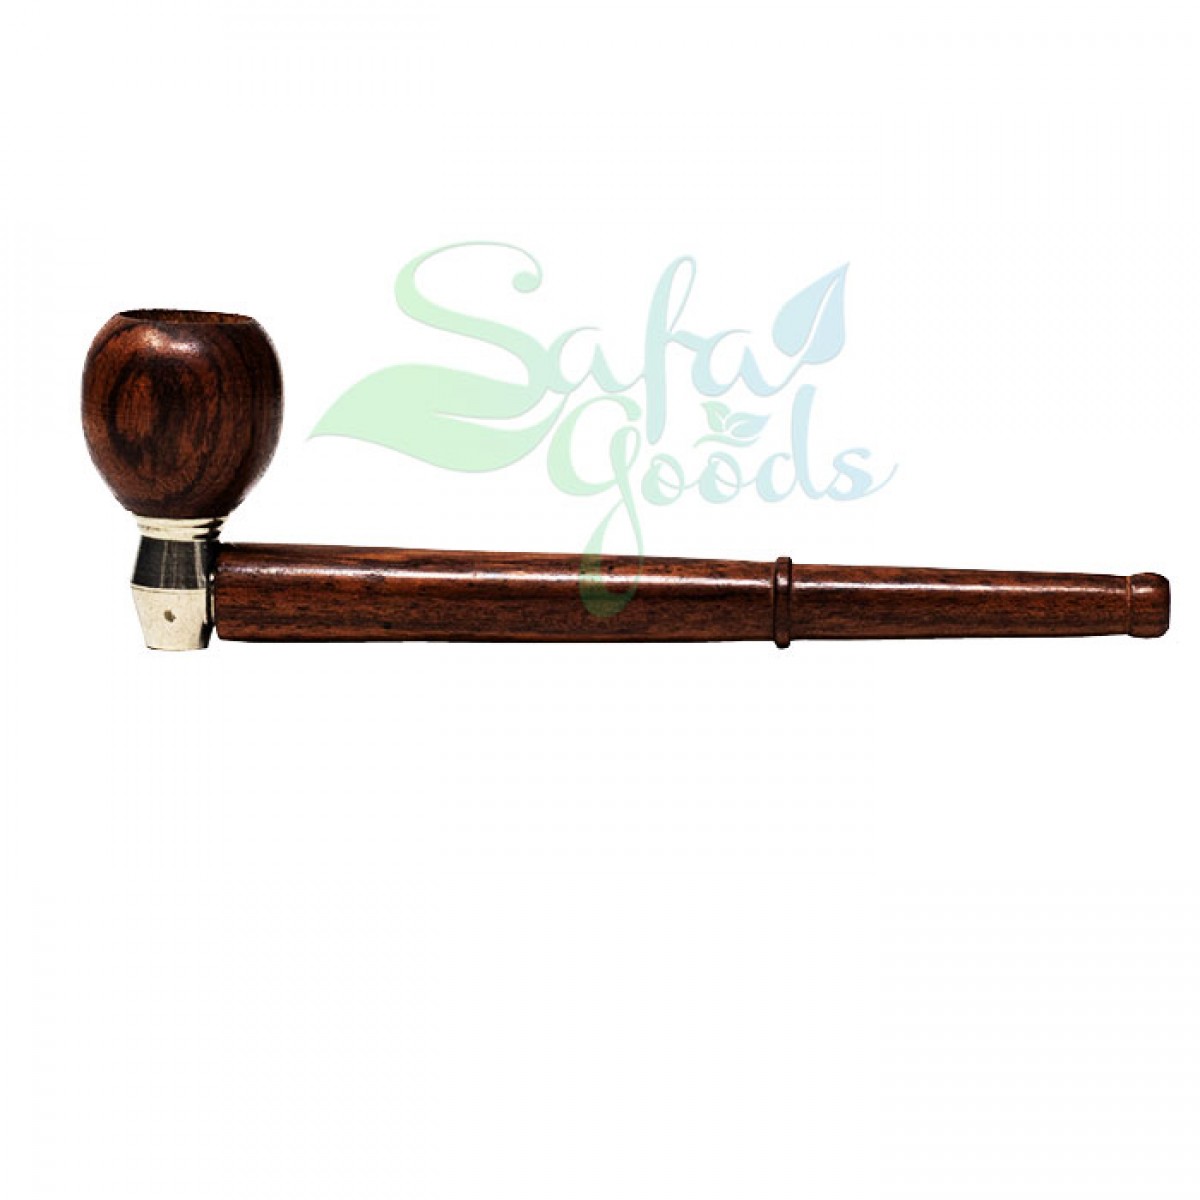 6 Inch Wood Hand Pipes